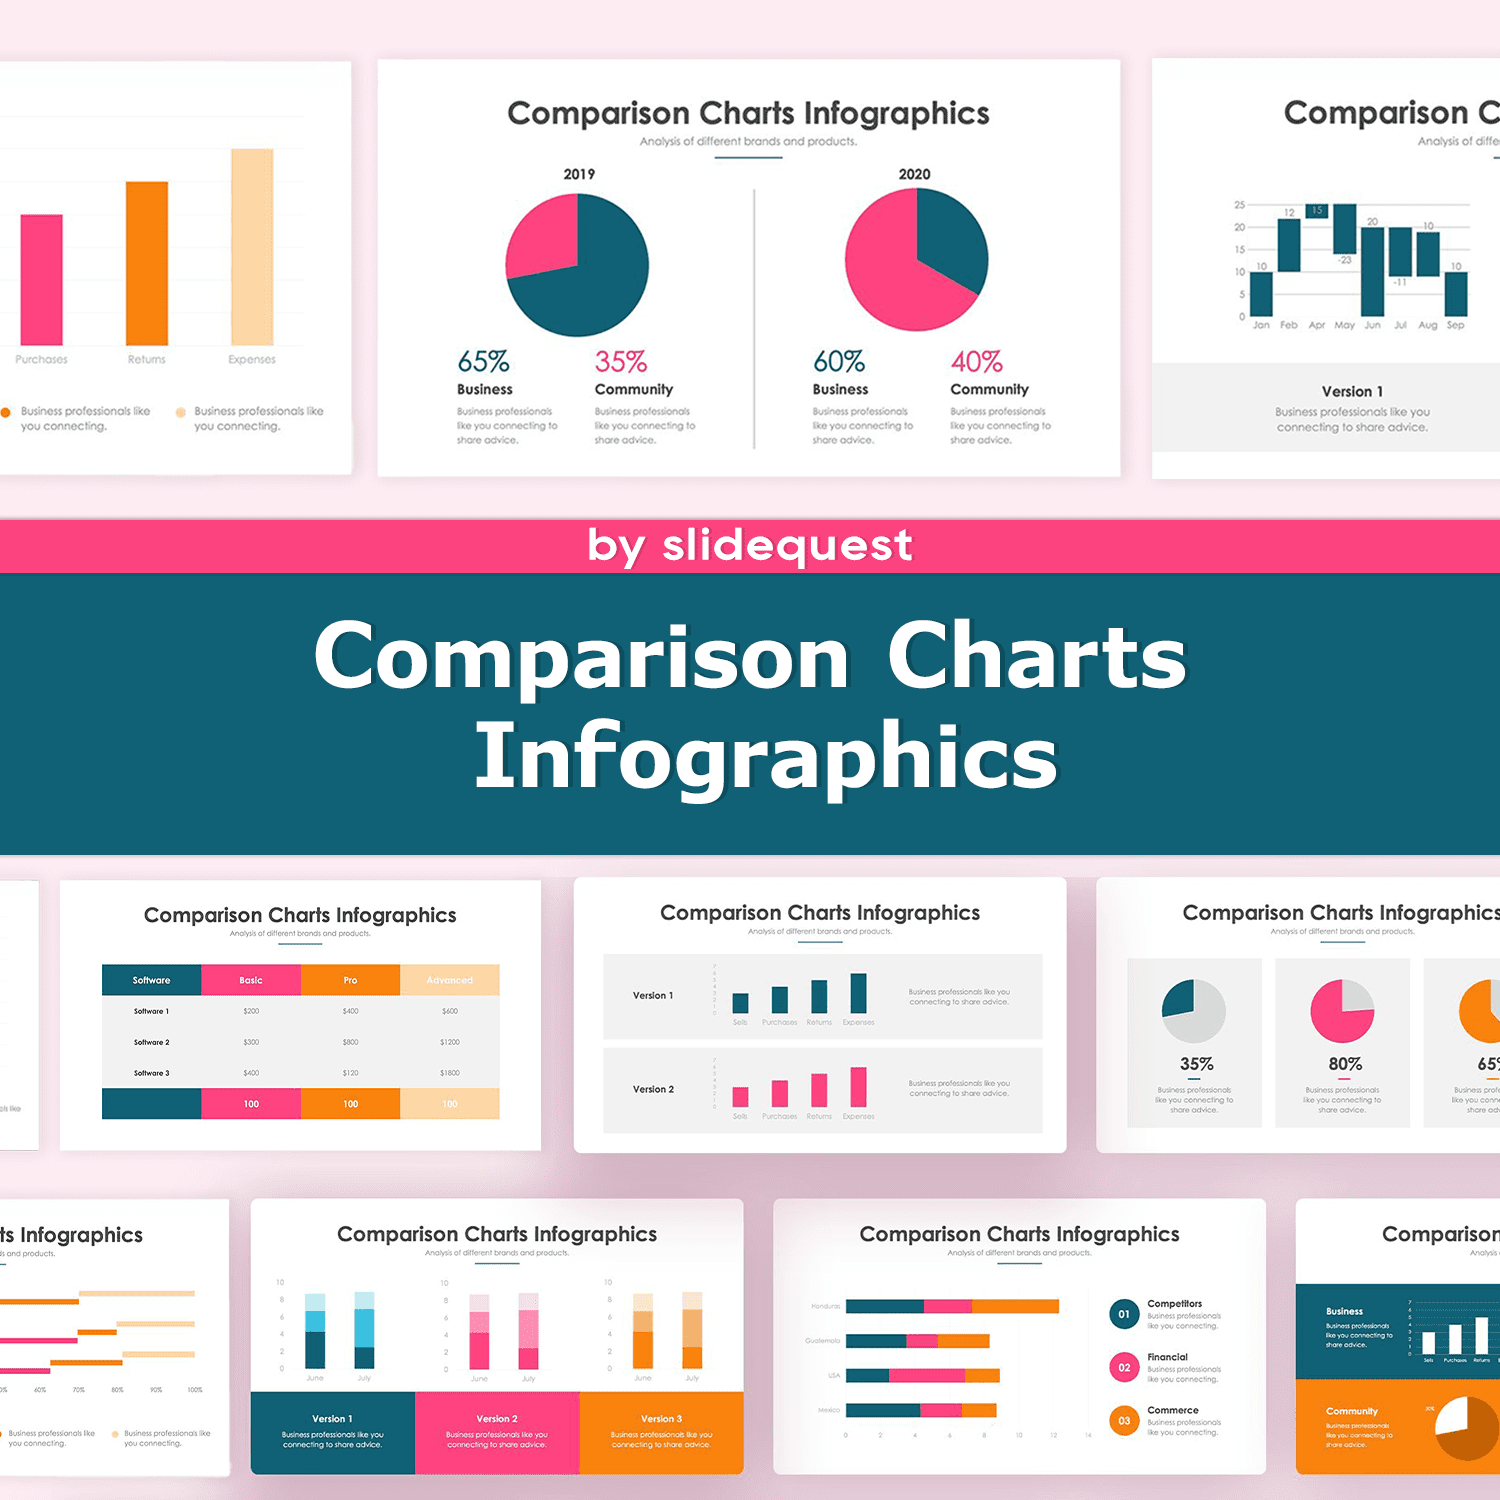 Comparison Charts Infographics cover image.